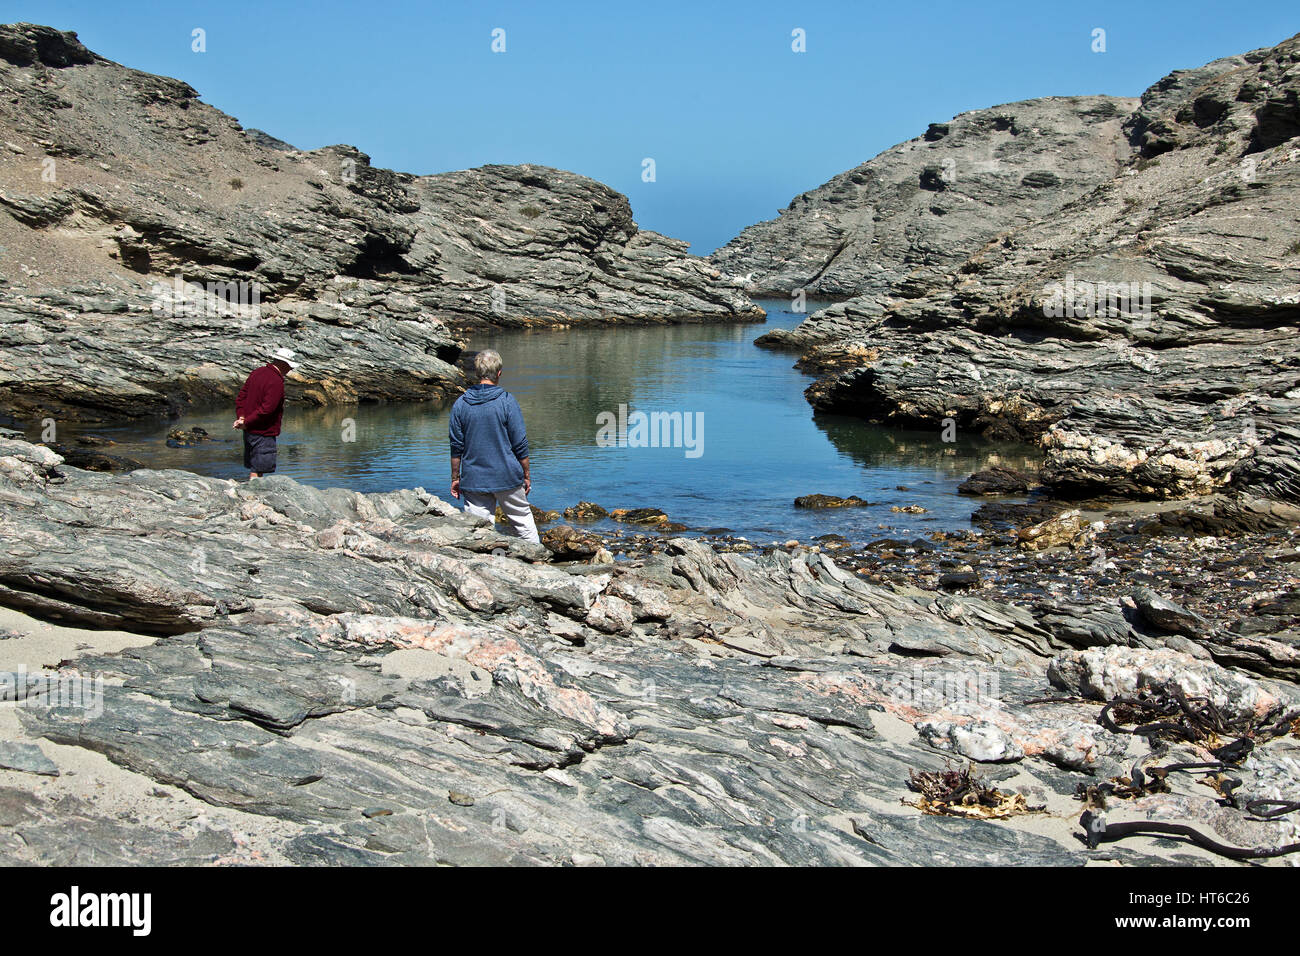 Tourists exploring the rocky inlet at Fiord on Diaz Point near Luderitz Stock Photo